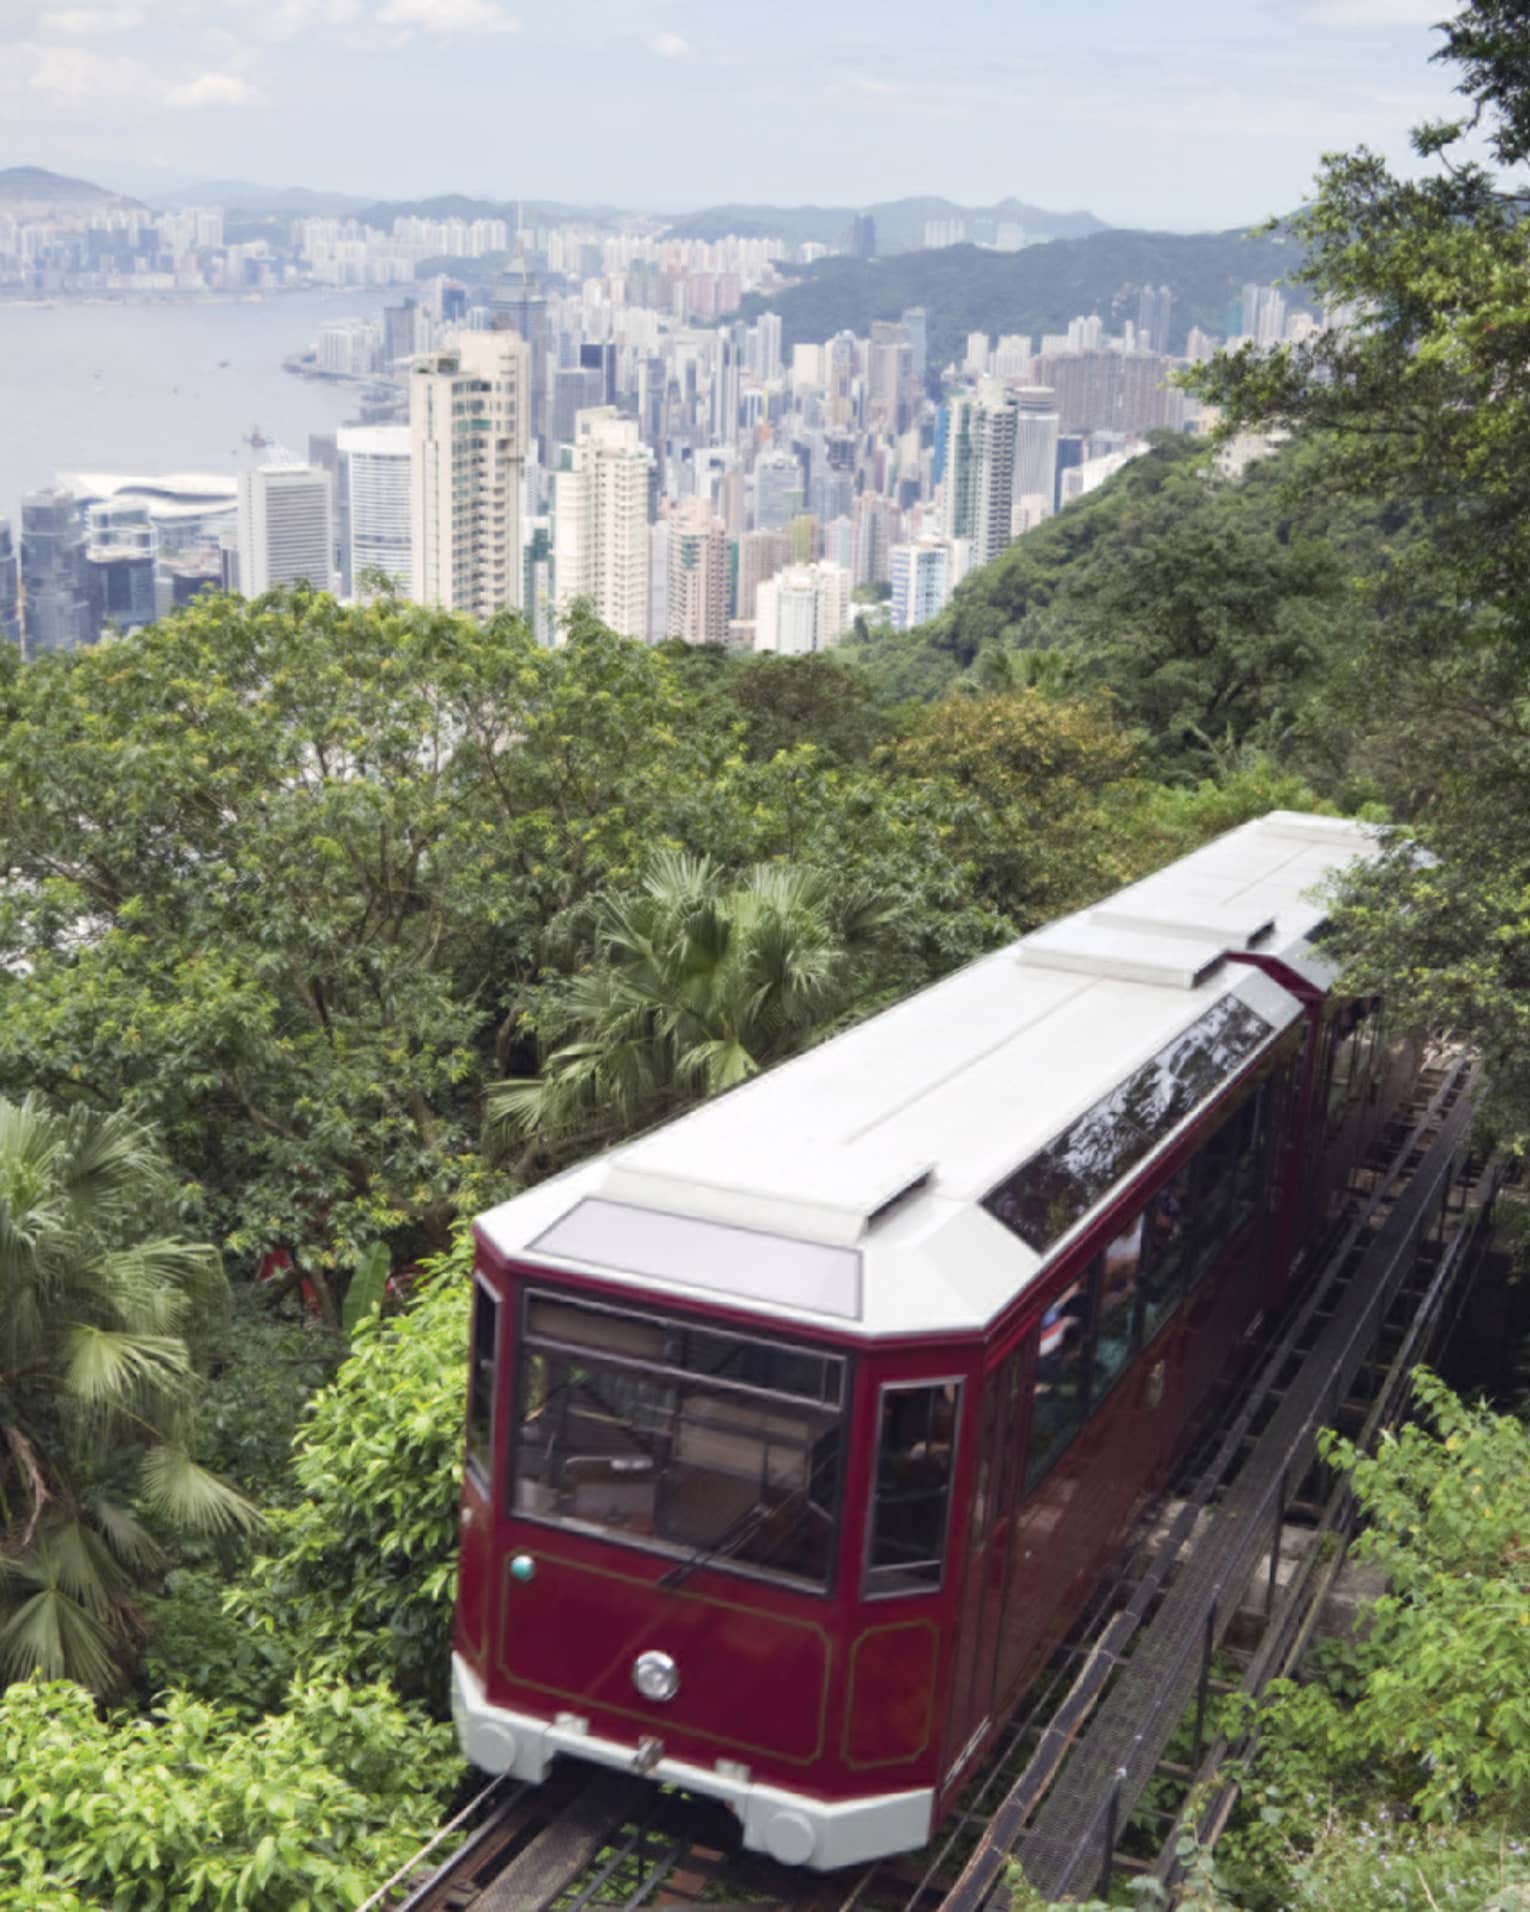 A local cultural experience tour - Peak Explorer, organized by Four Seasons Hotel Hong Kong, with Peak Tram, one of the world's most renowned and oldest funicular railways.